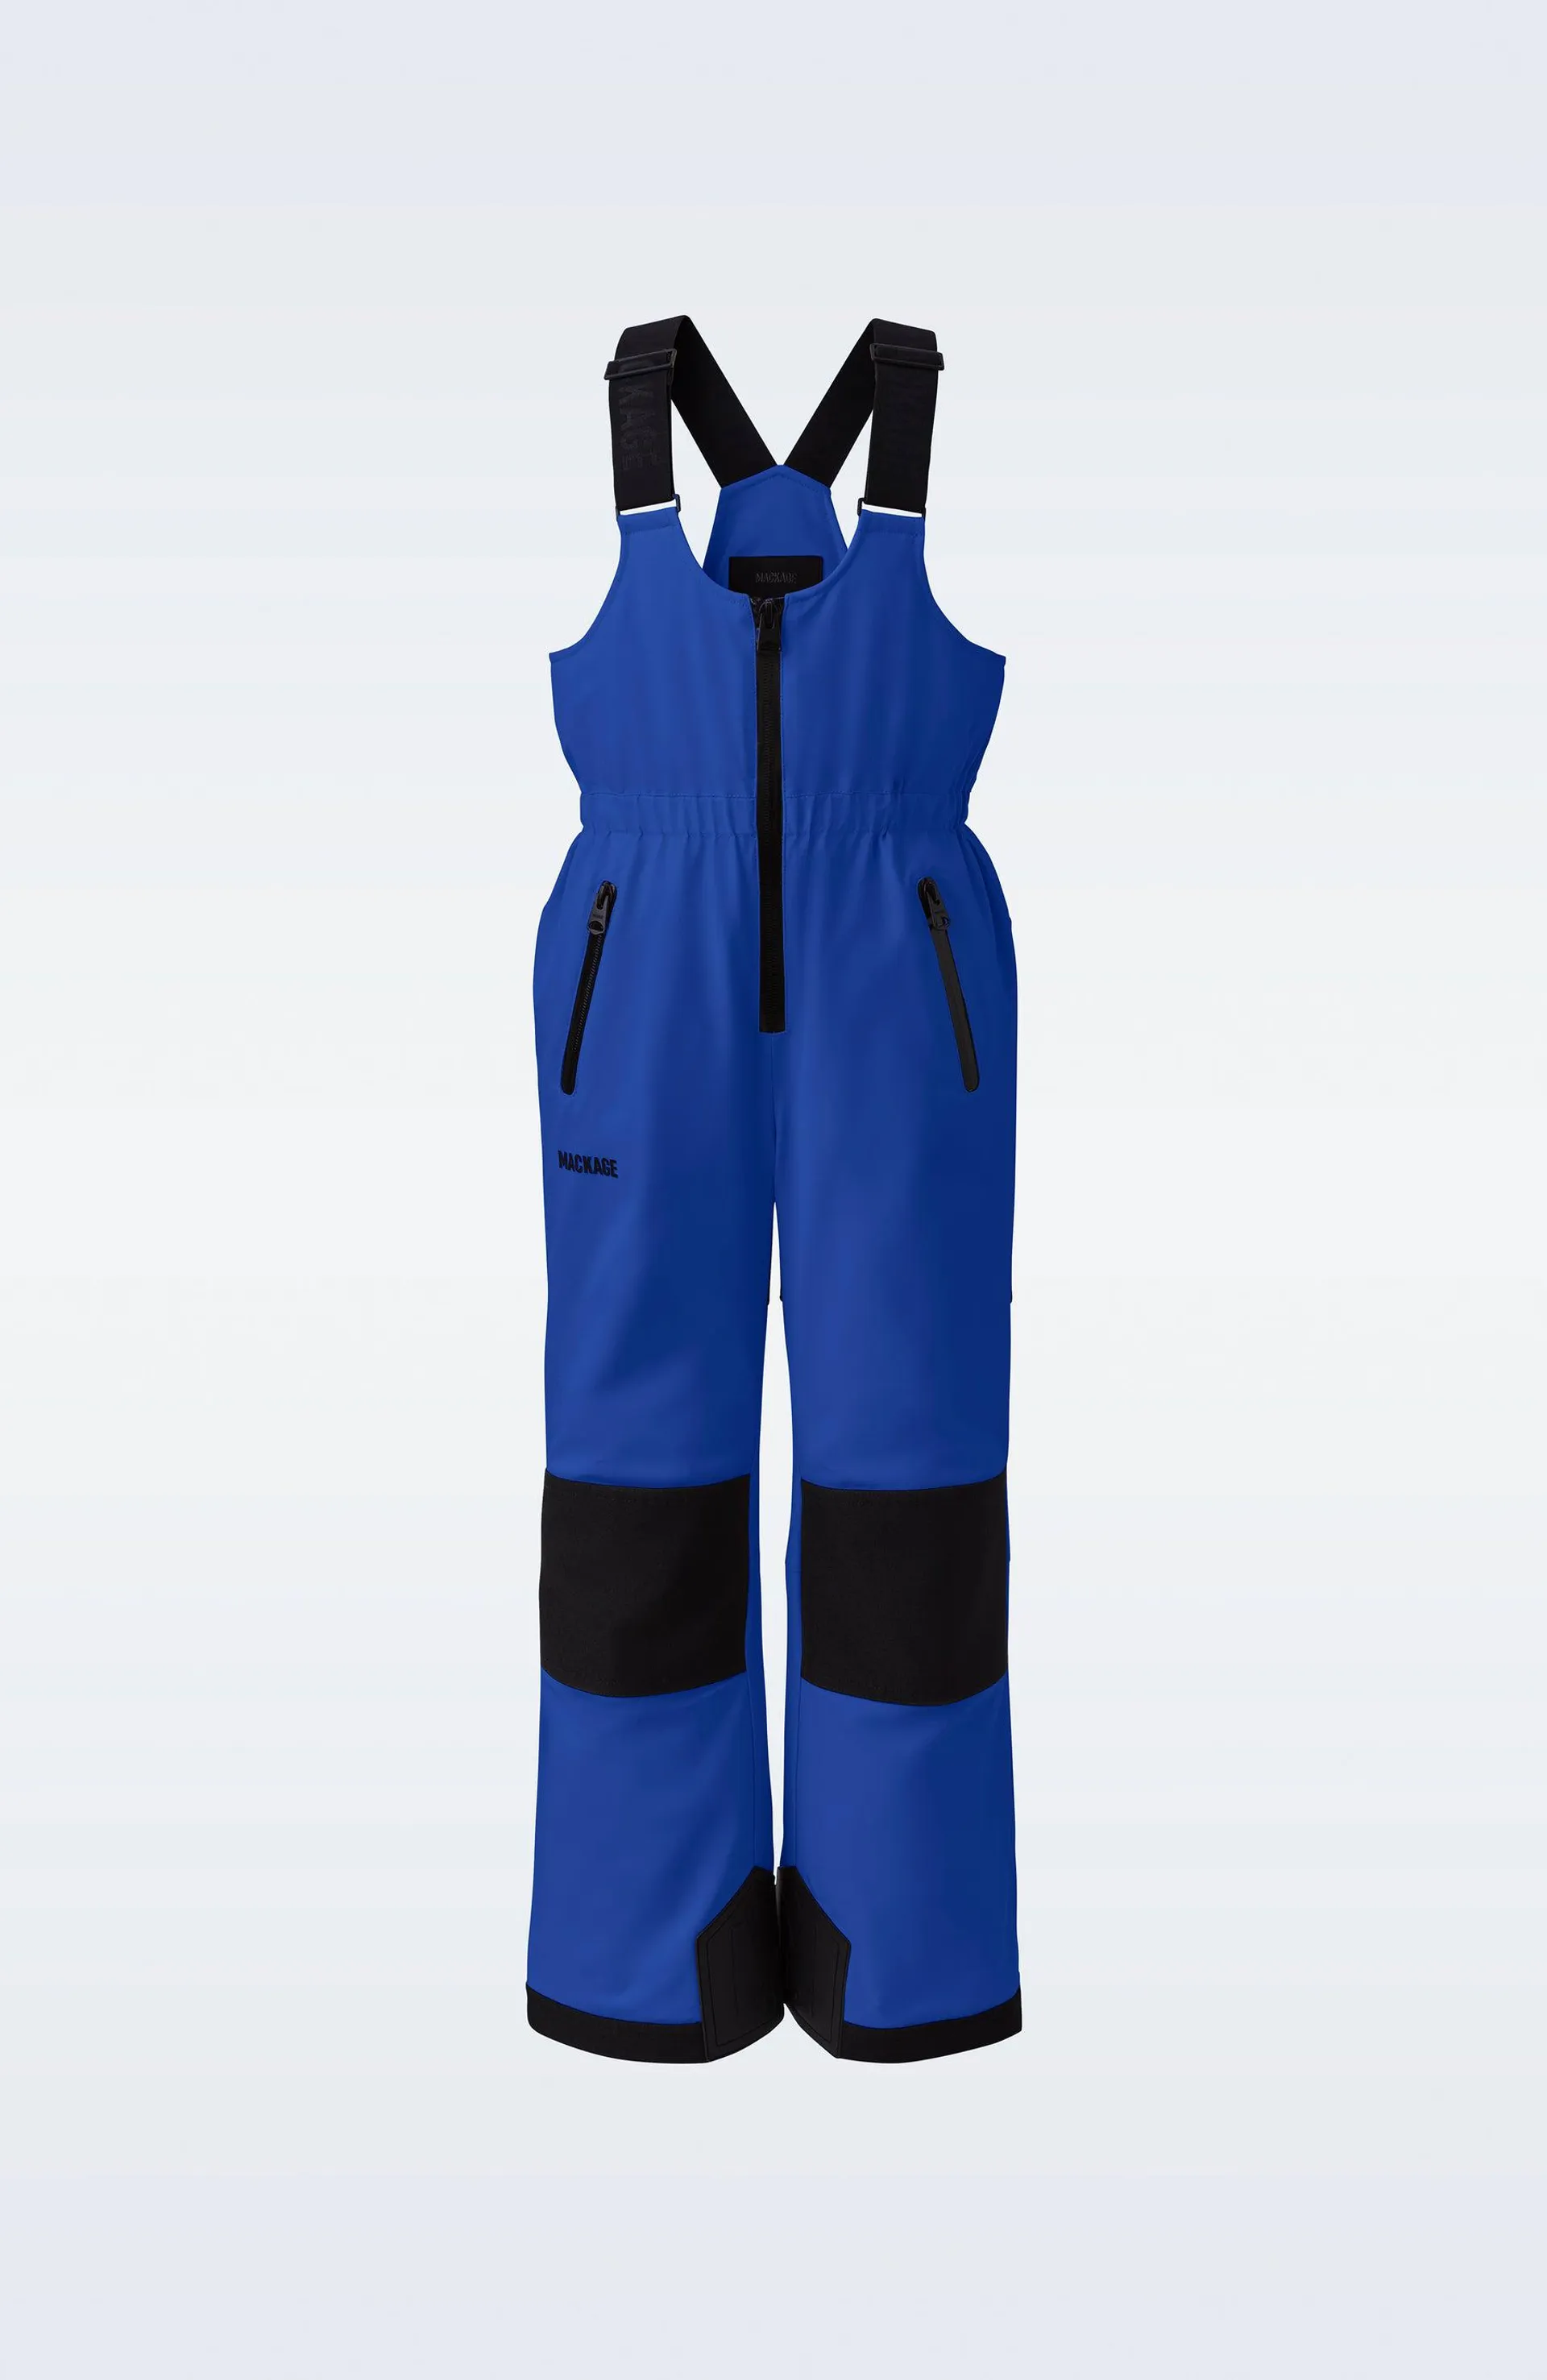 MYRON-TZ Ski overalls with adjustable suspenders for toddlers (2-6 years)